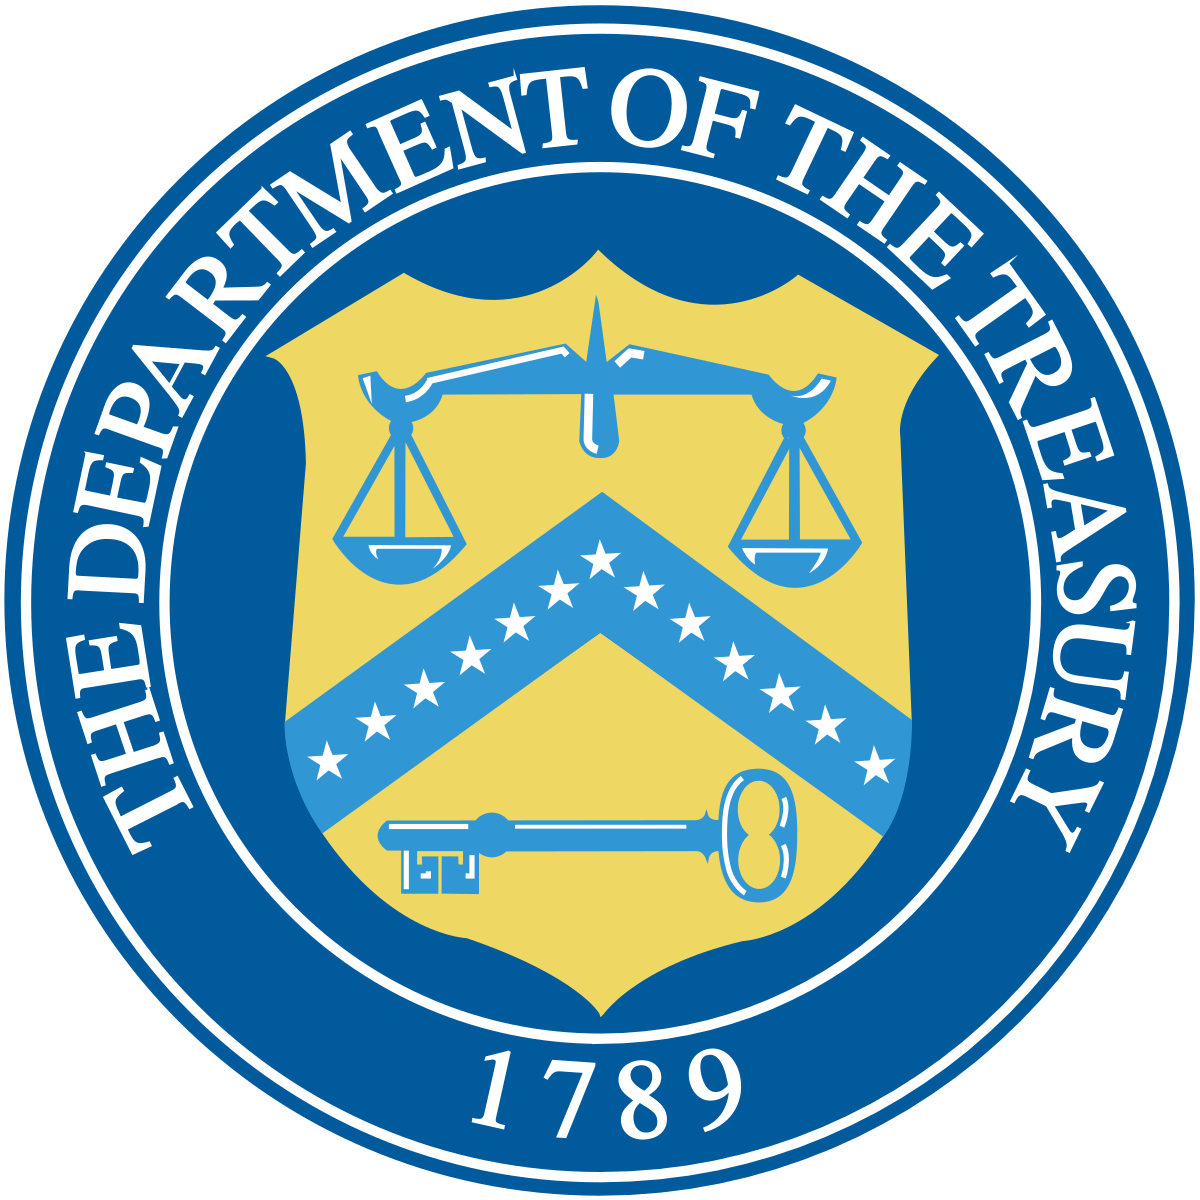 The U.S. Treasury Department has re-imposed sanctions on Dan Gertler after Trump lifted them during his final days in office (Credit: U.S. Treasury Department)